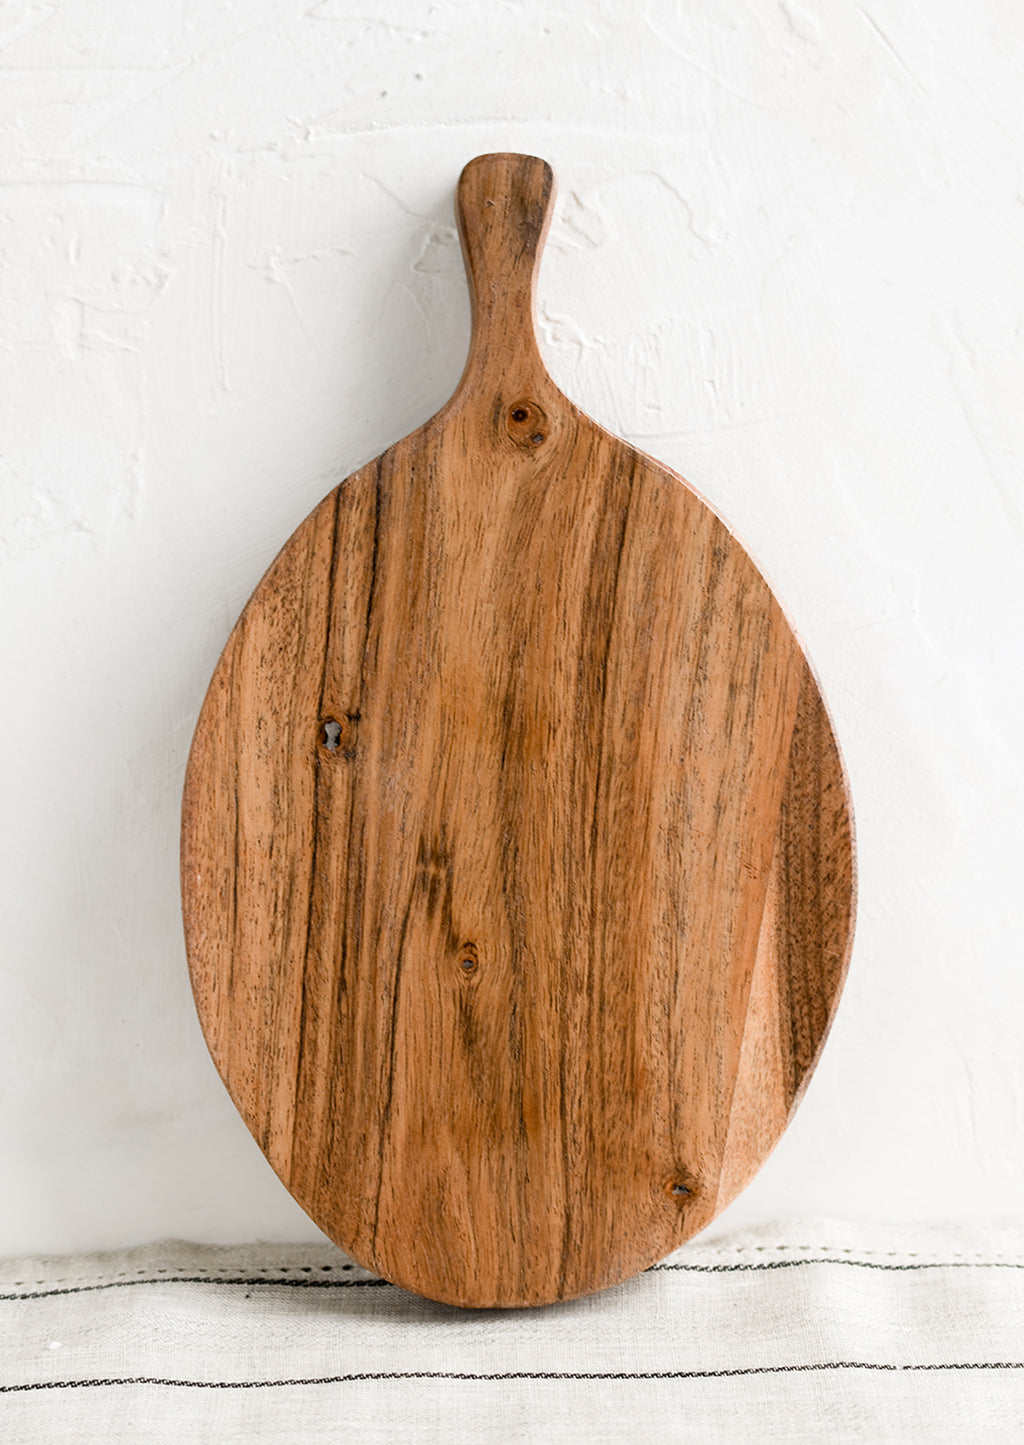 1: An oval shaped paddle-style cutting board in acacia wood.